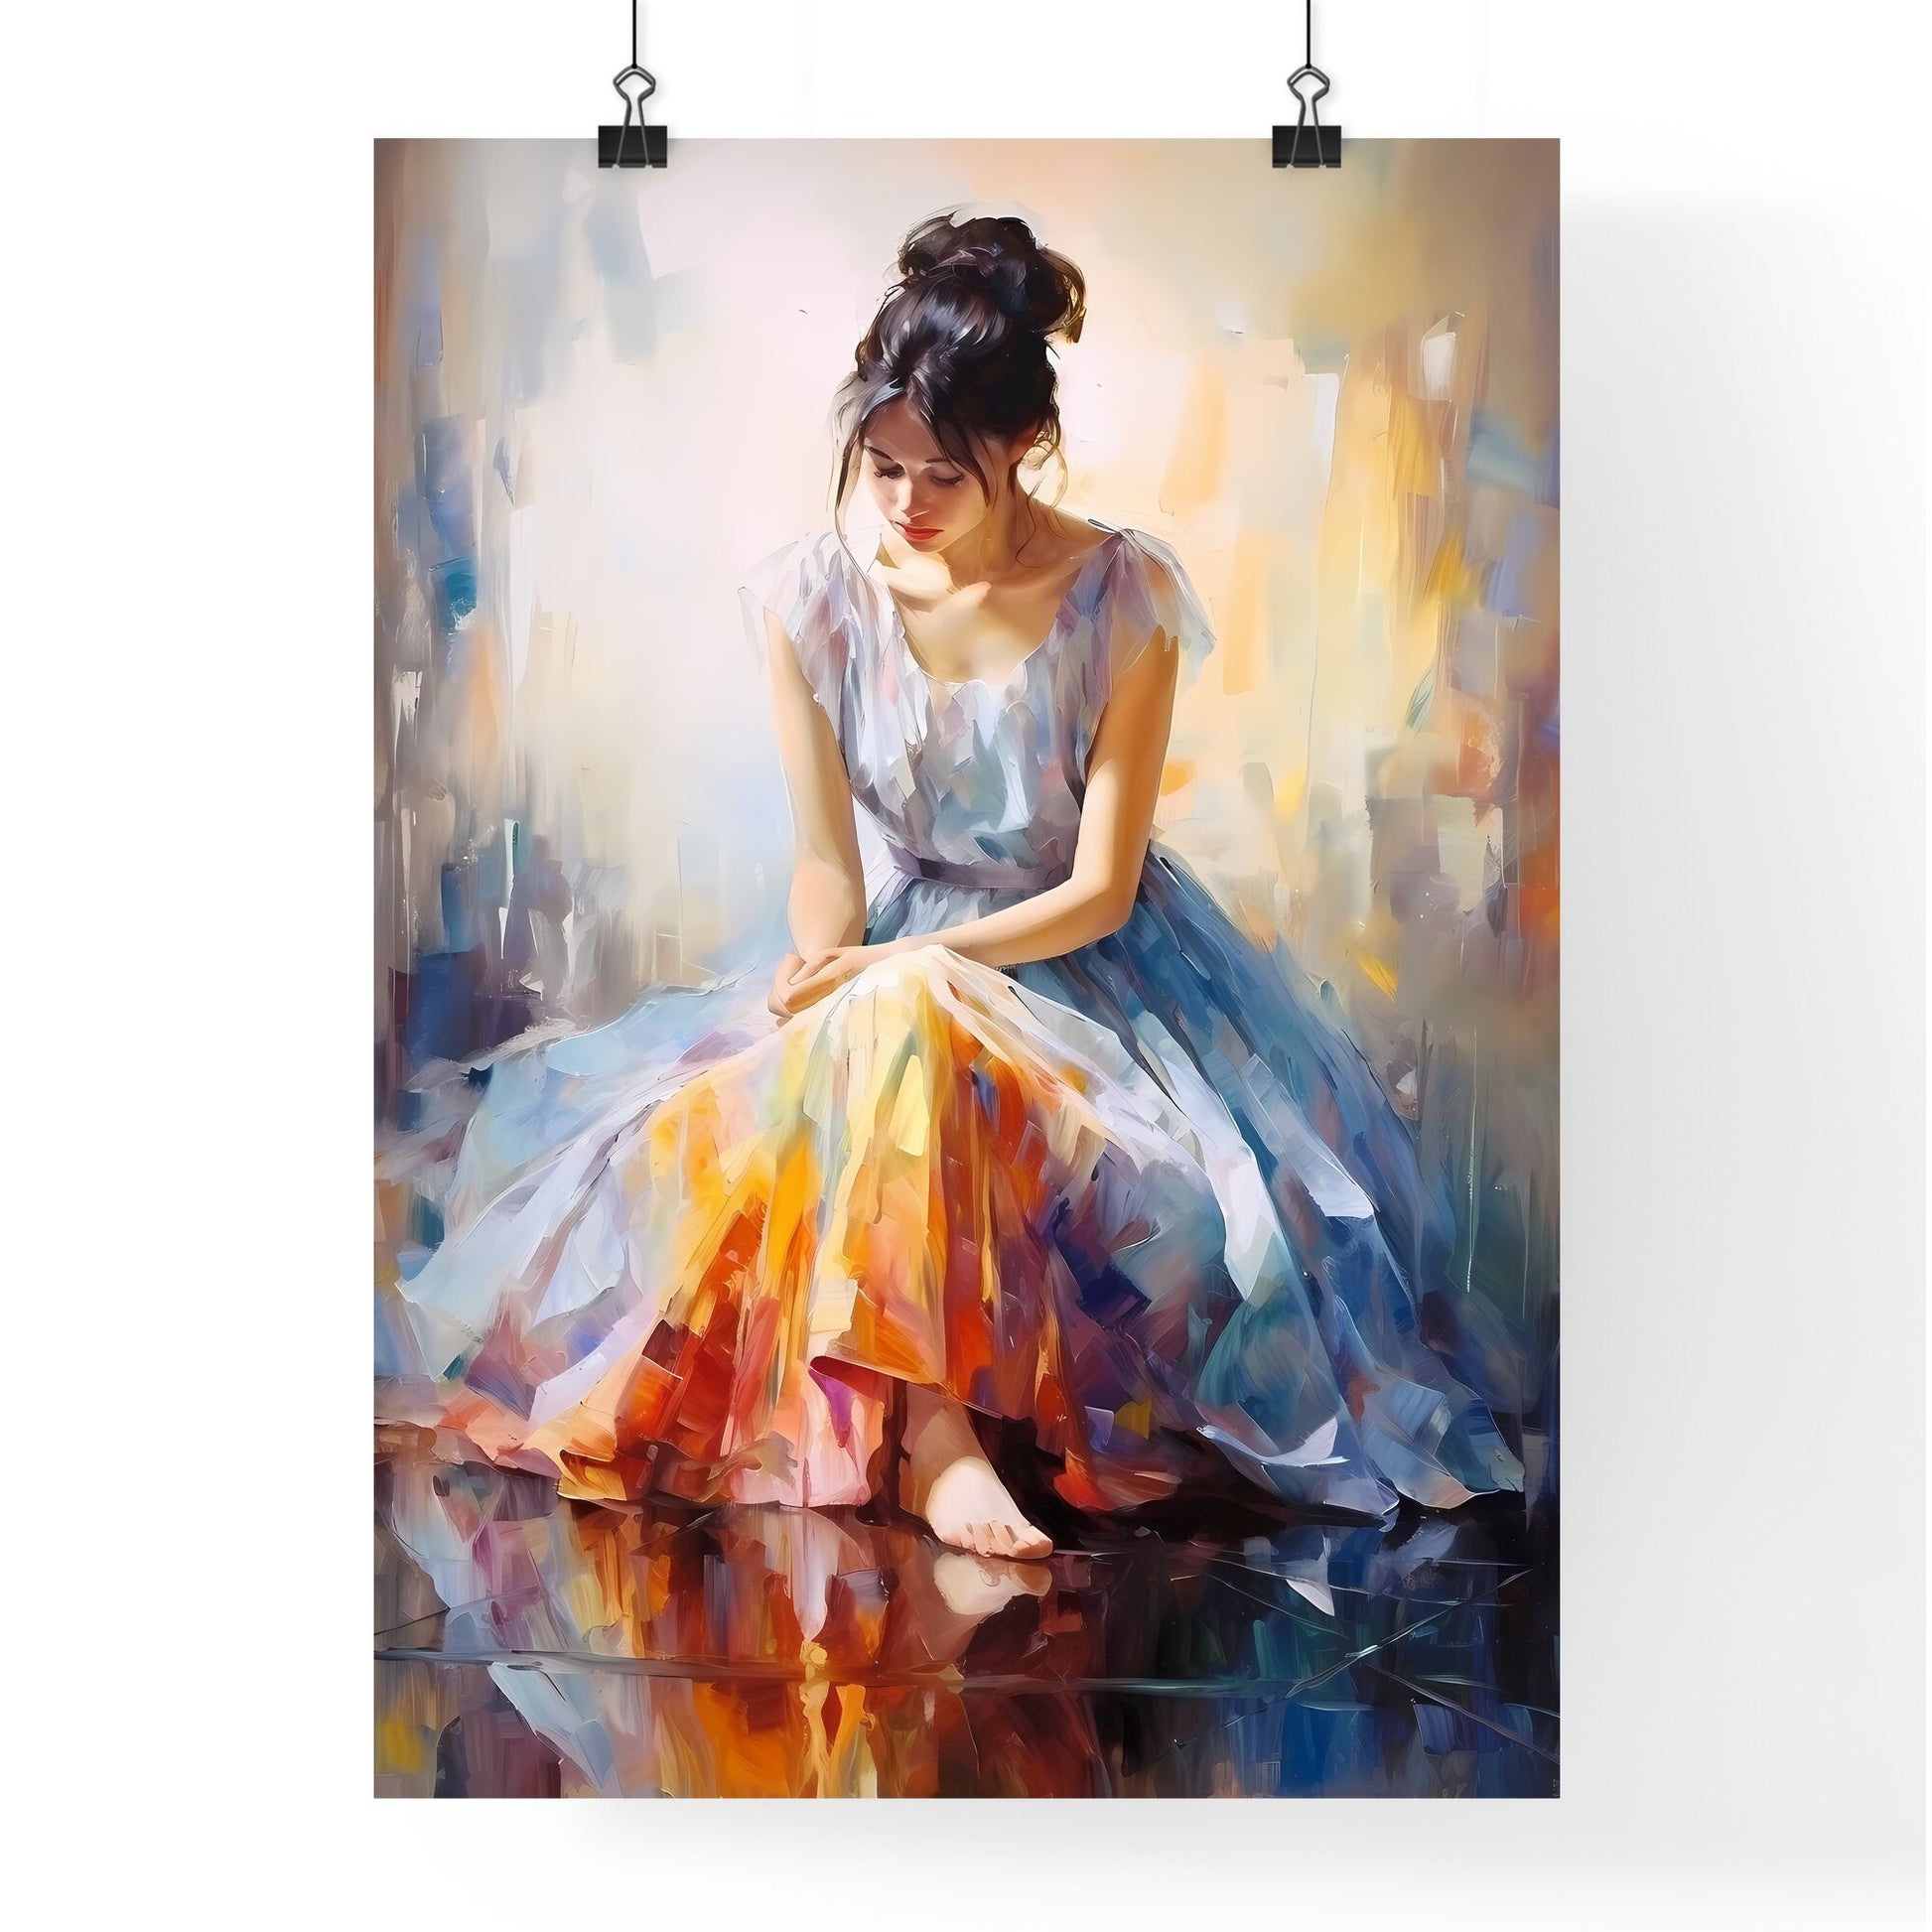 The Ballerina Sitting Near A Mirror - A Painting Of A Woman In A Dress Default Title